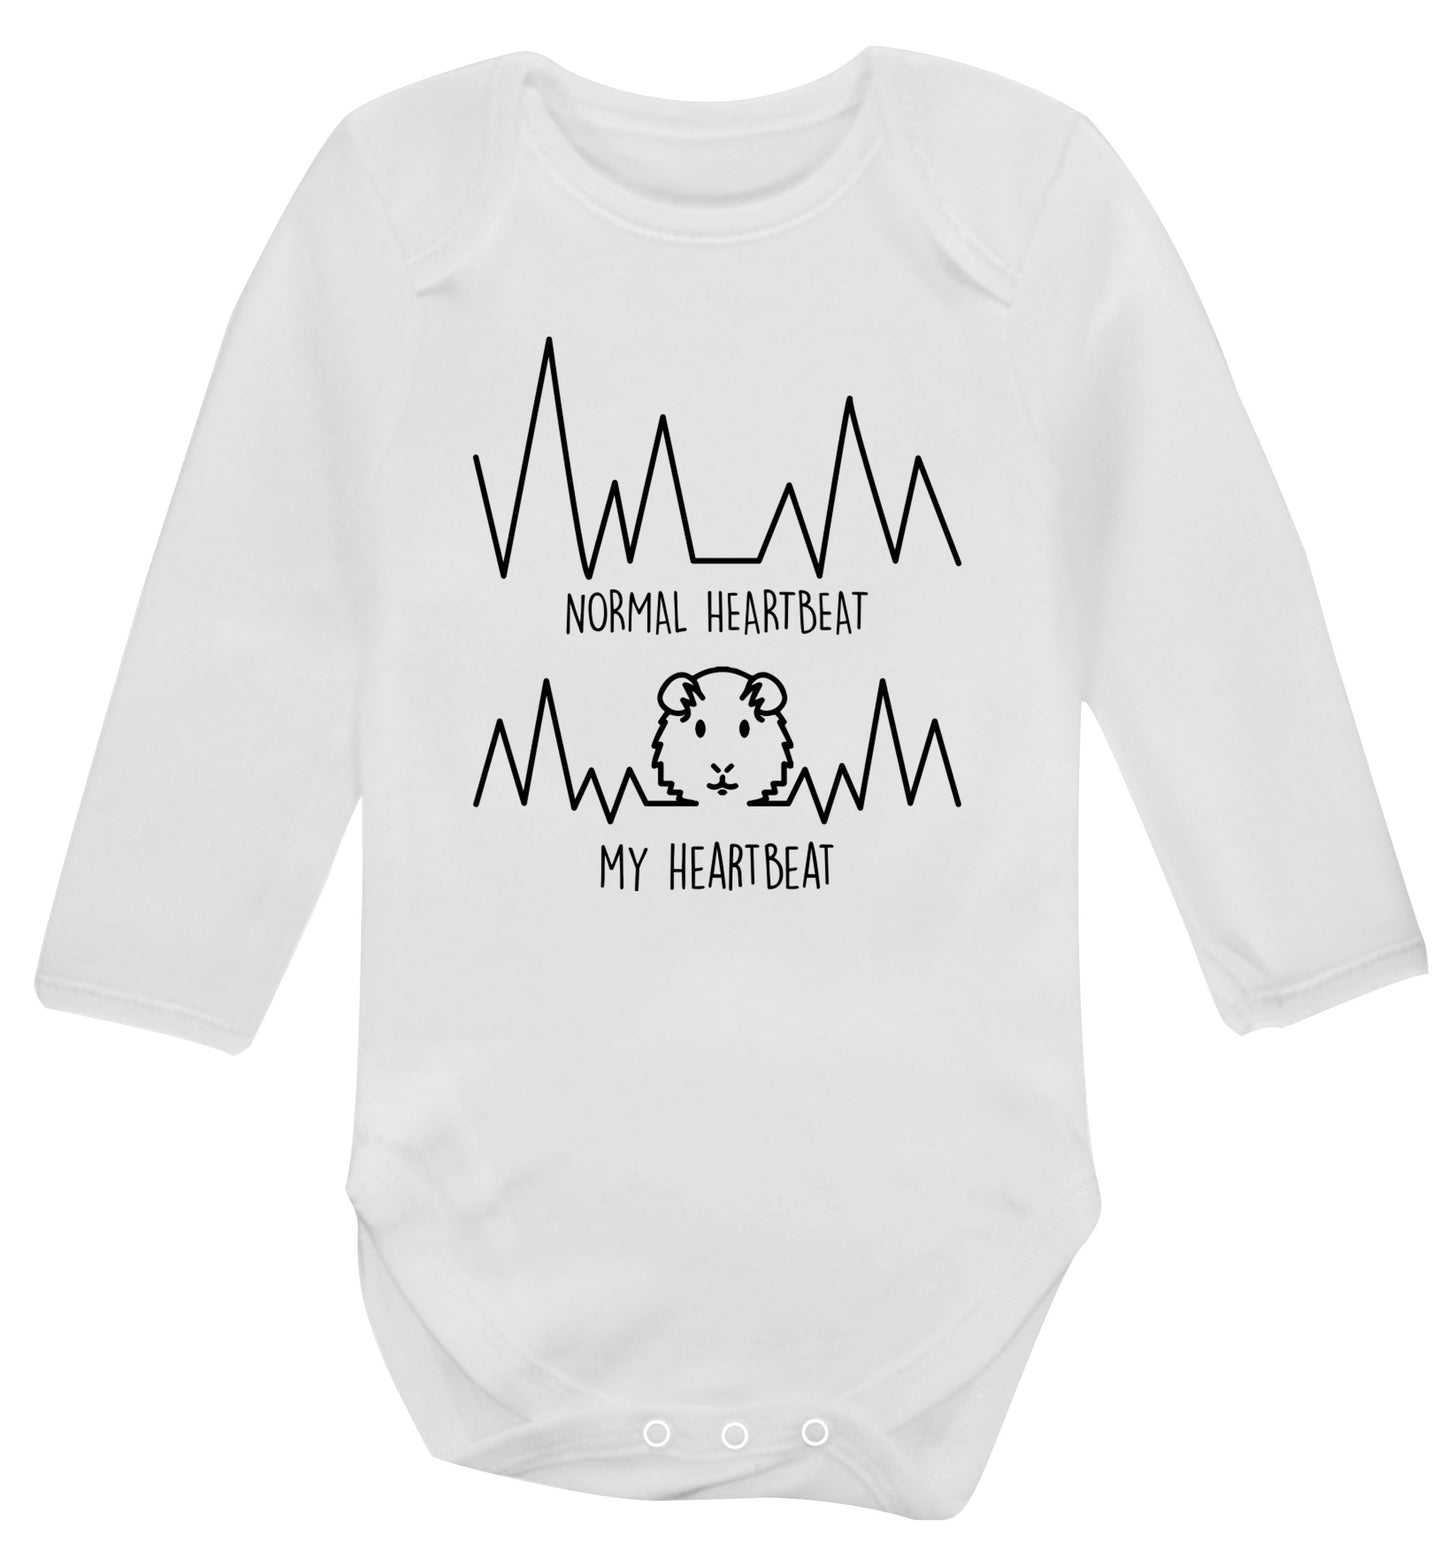 Normal heartbeat vs my heartbeat guinea pig lover Baby Vest long sleeved white 6-12 months